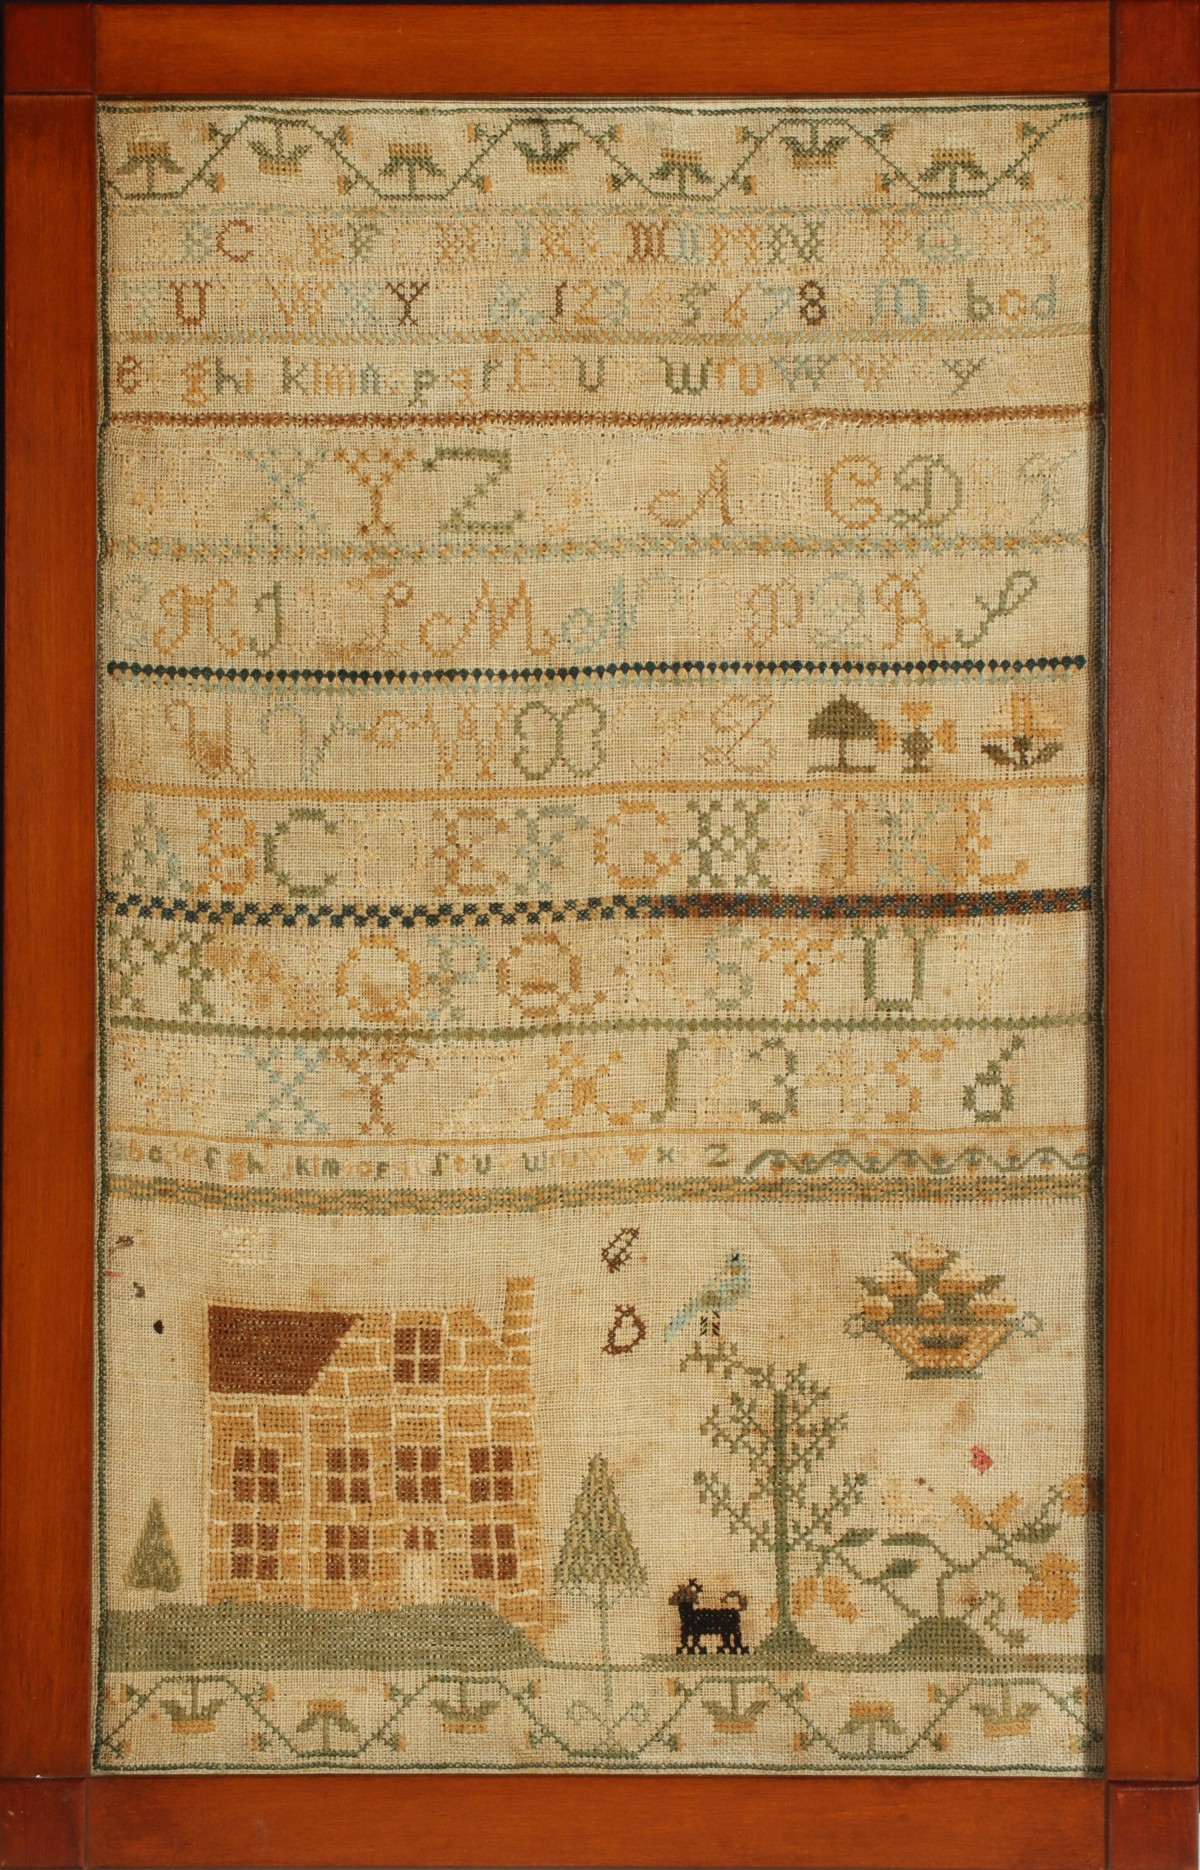 A 19TH CENTURY CROSS STITCH SAMPLER WITH HOME AND DOG